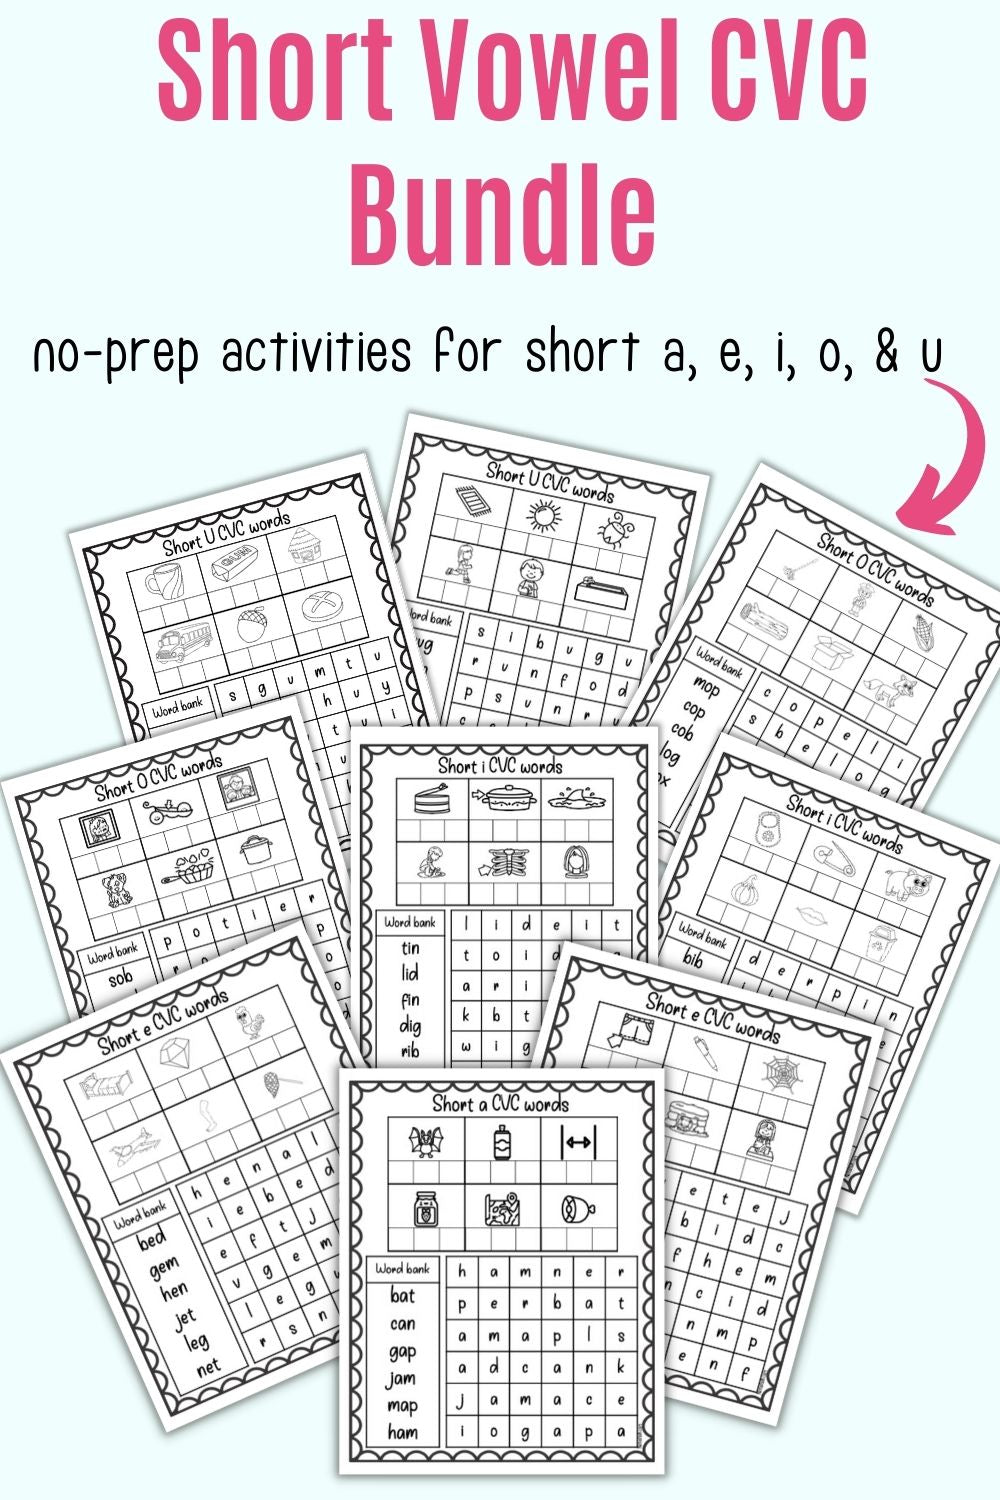 Text "short vowel cvc bundle" with a preview of nine page of printable CVC word activity 